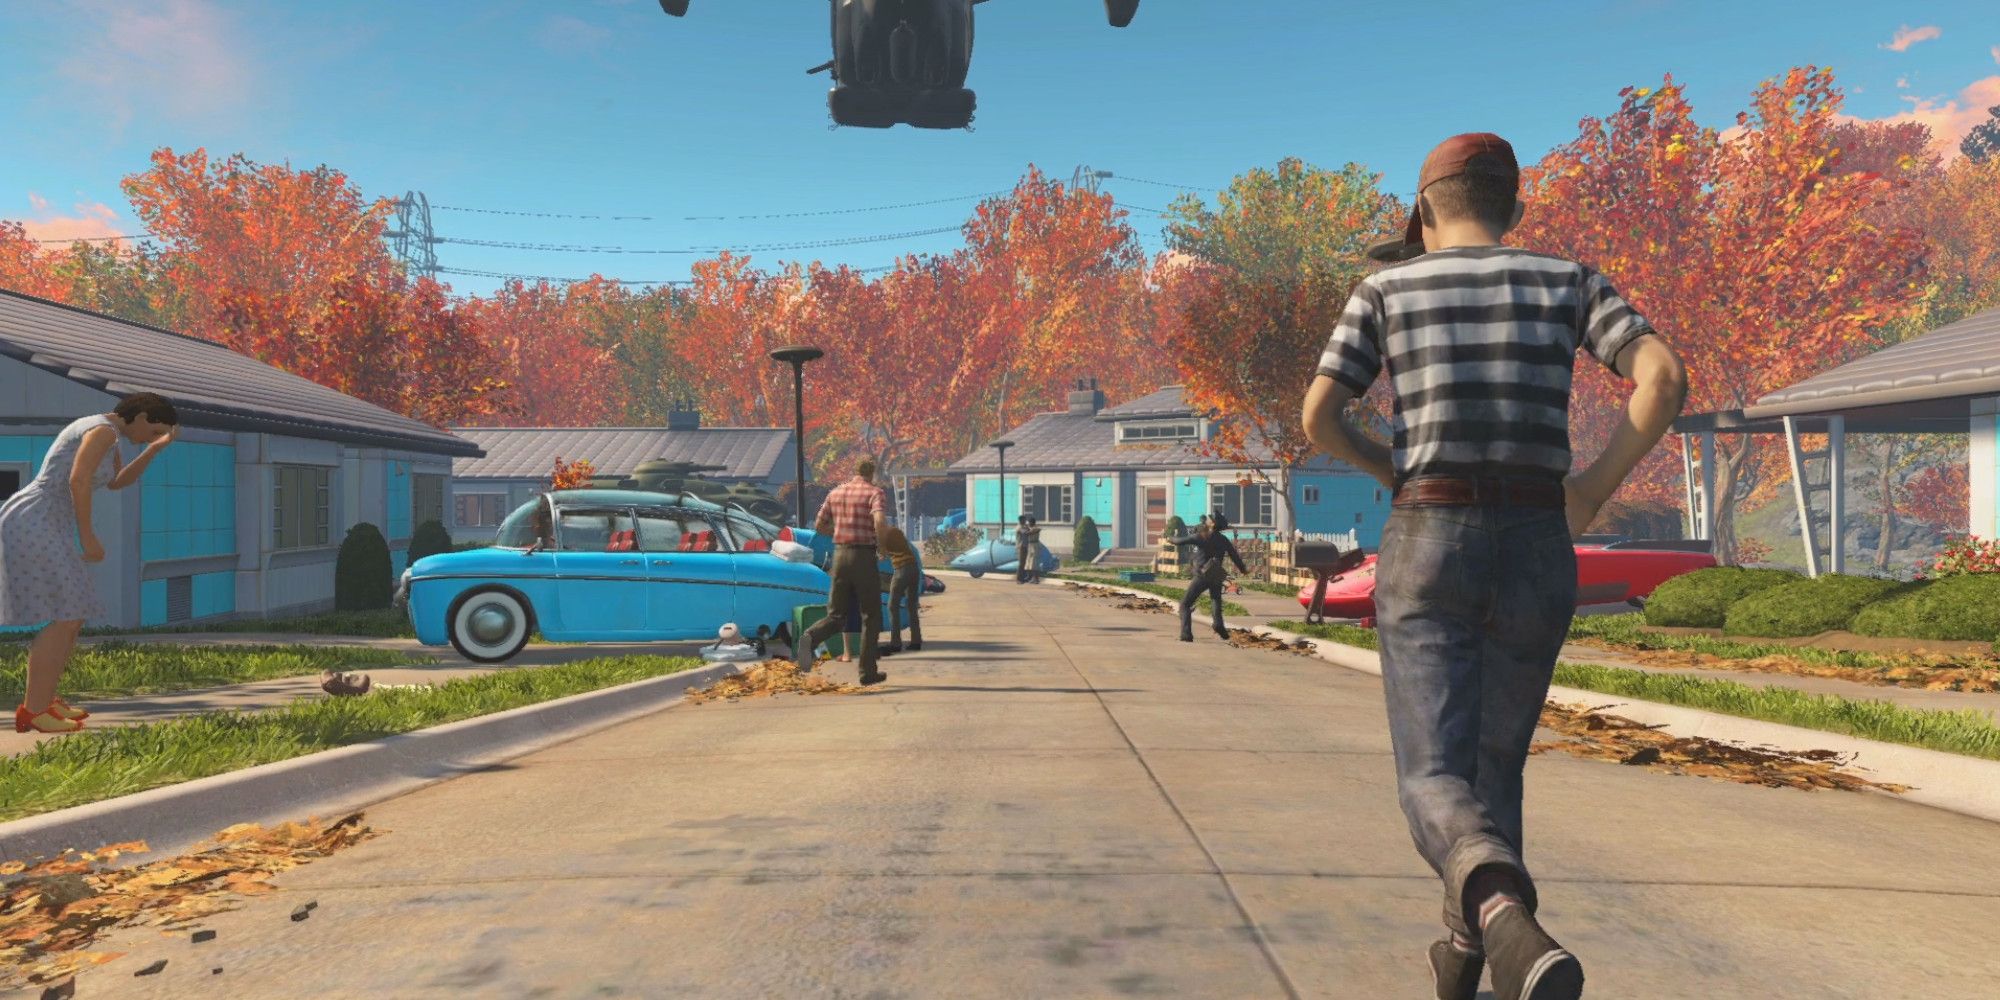 Residents flee from a nuke in Fallout 4